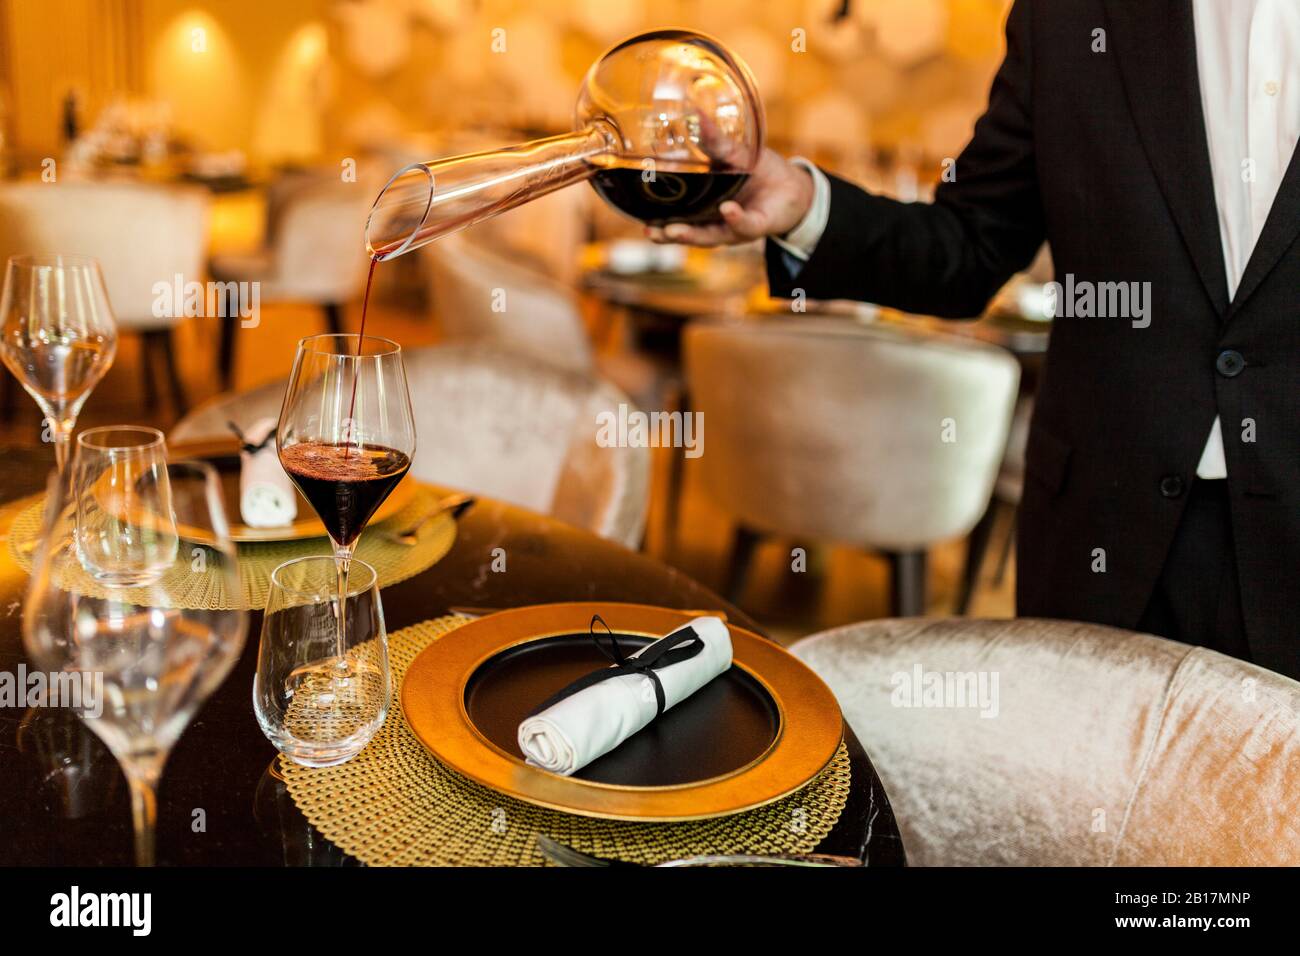 Waiter pouring wine from decanter into glass in fancy restaurant Stock Photo